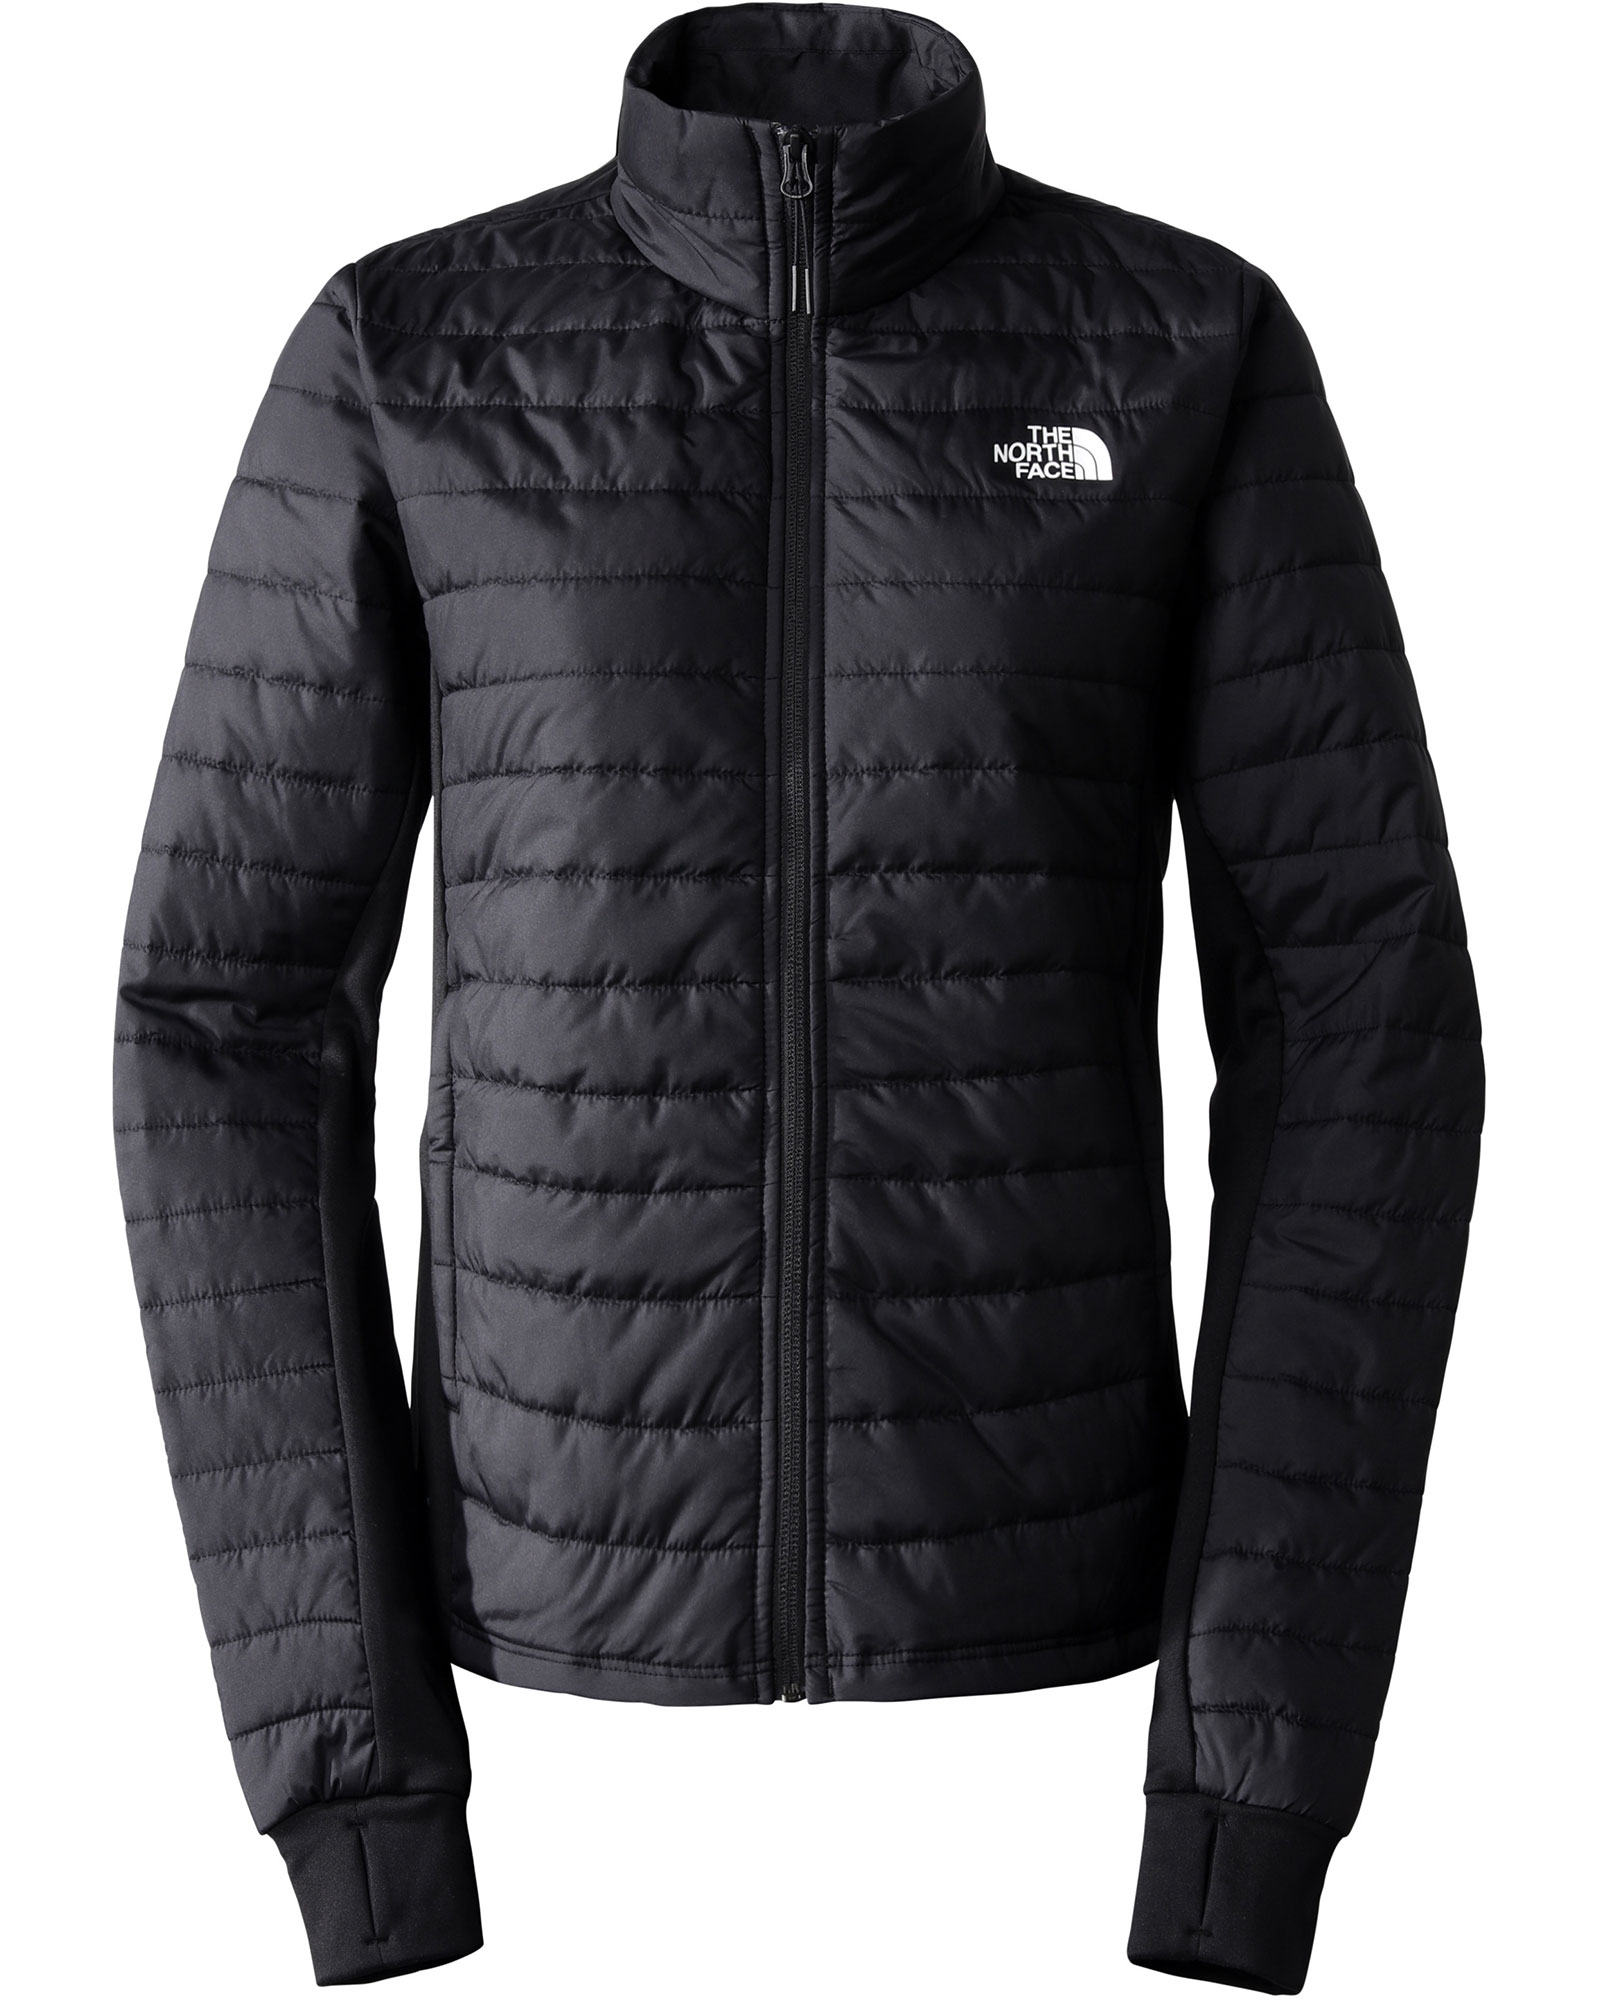 The North Face Canyonlands Hybrid Women’s Insulated Jacket - TNF Black S